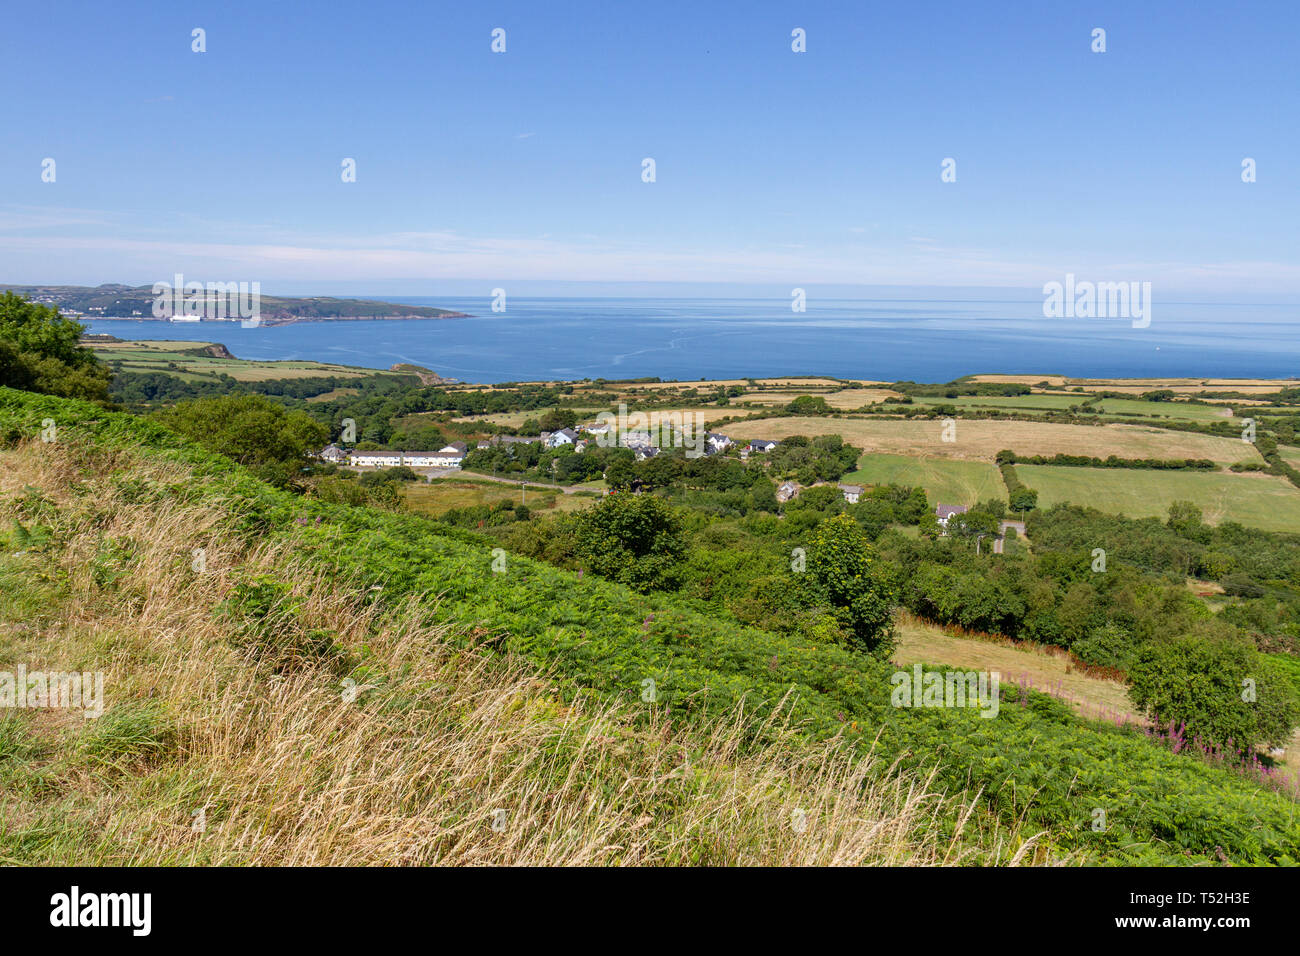 Stunning view over fields near Newport, Pembrokeshire Coast National Park, Wales towards Fishguard harbour and the Irish Sea. Stock Photo